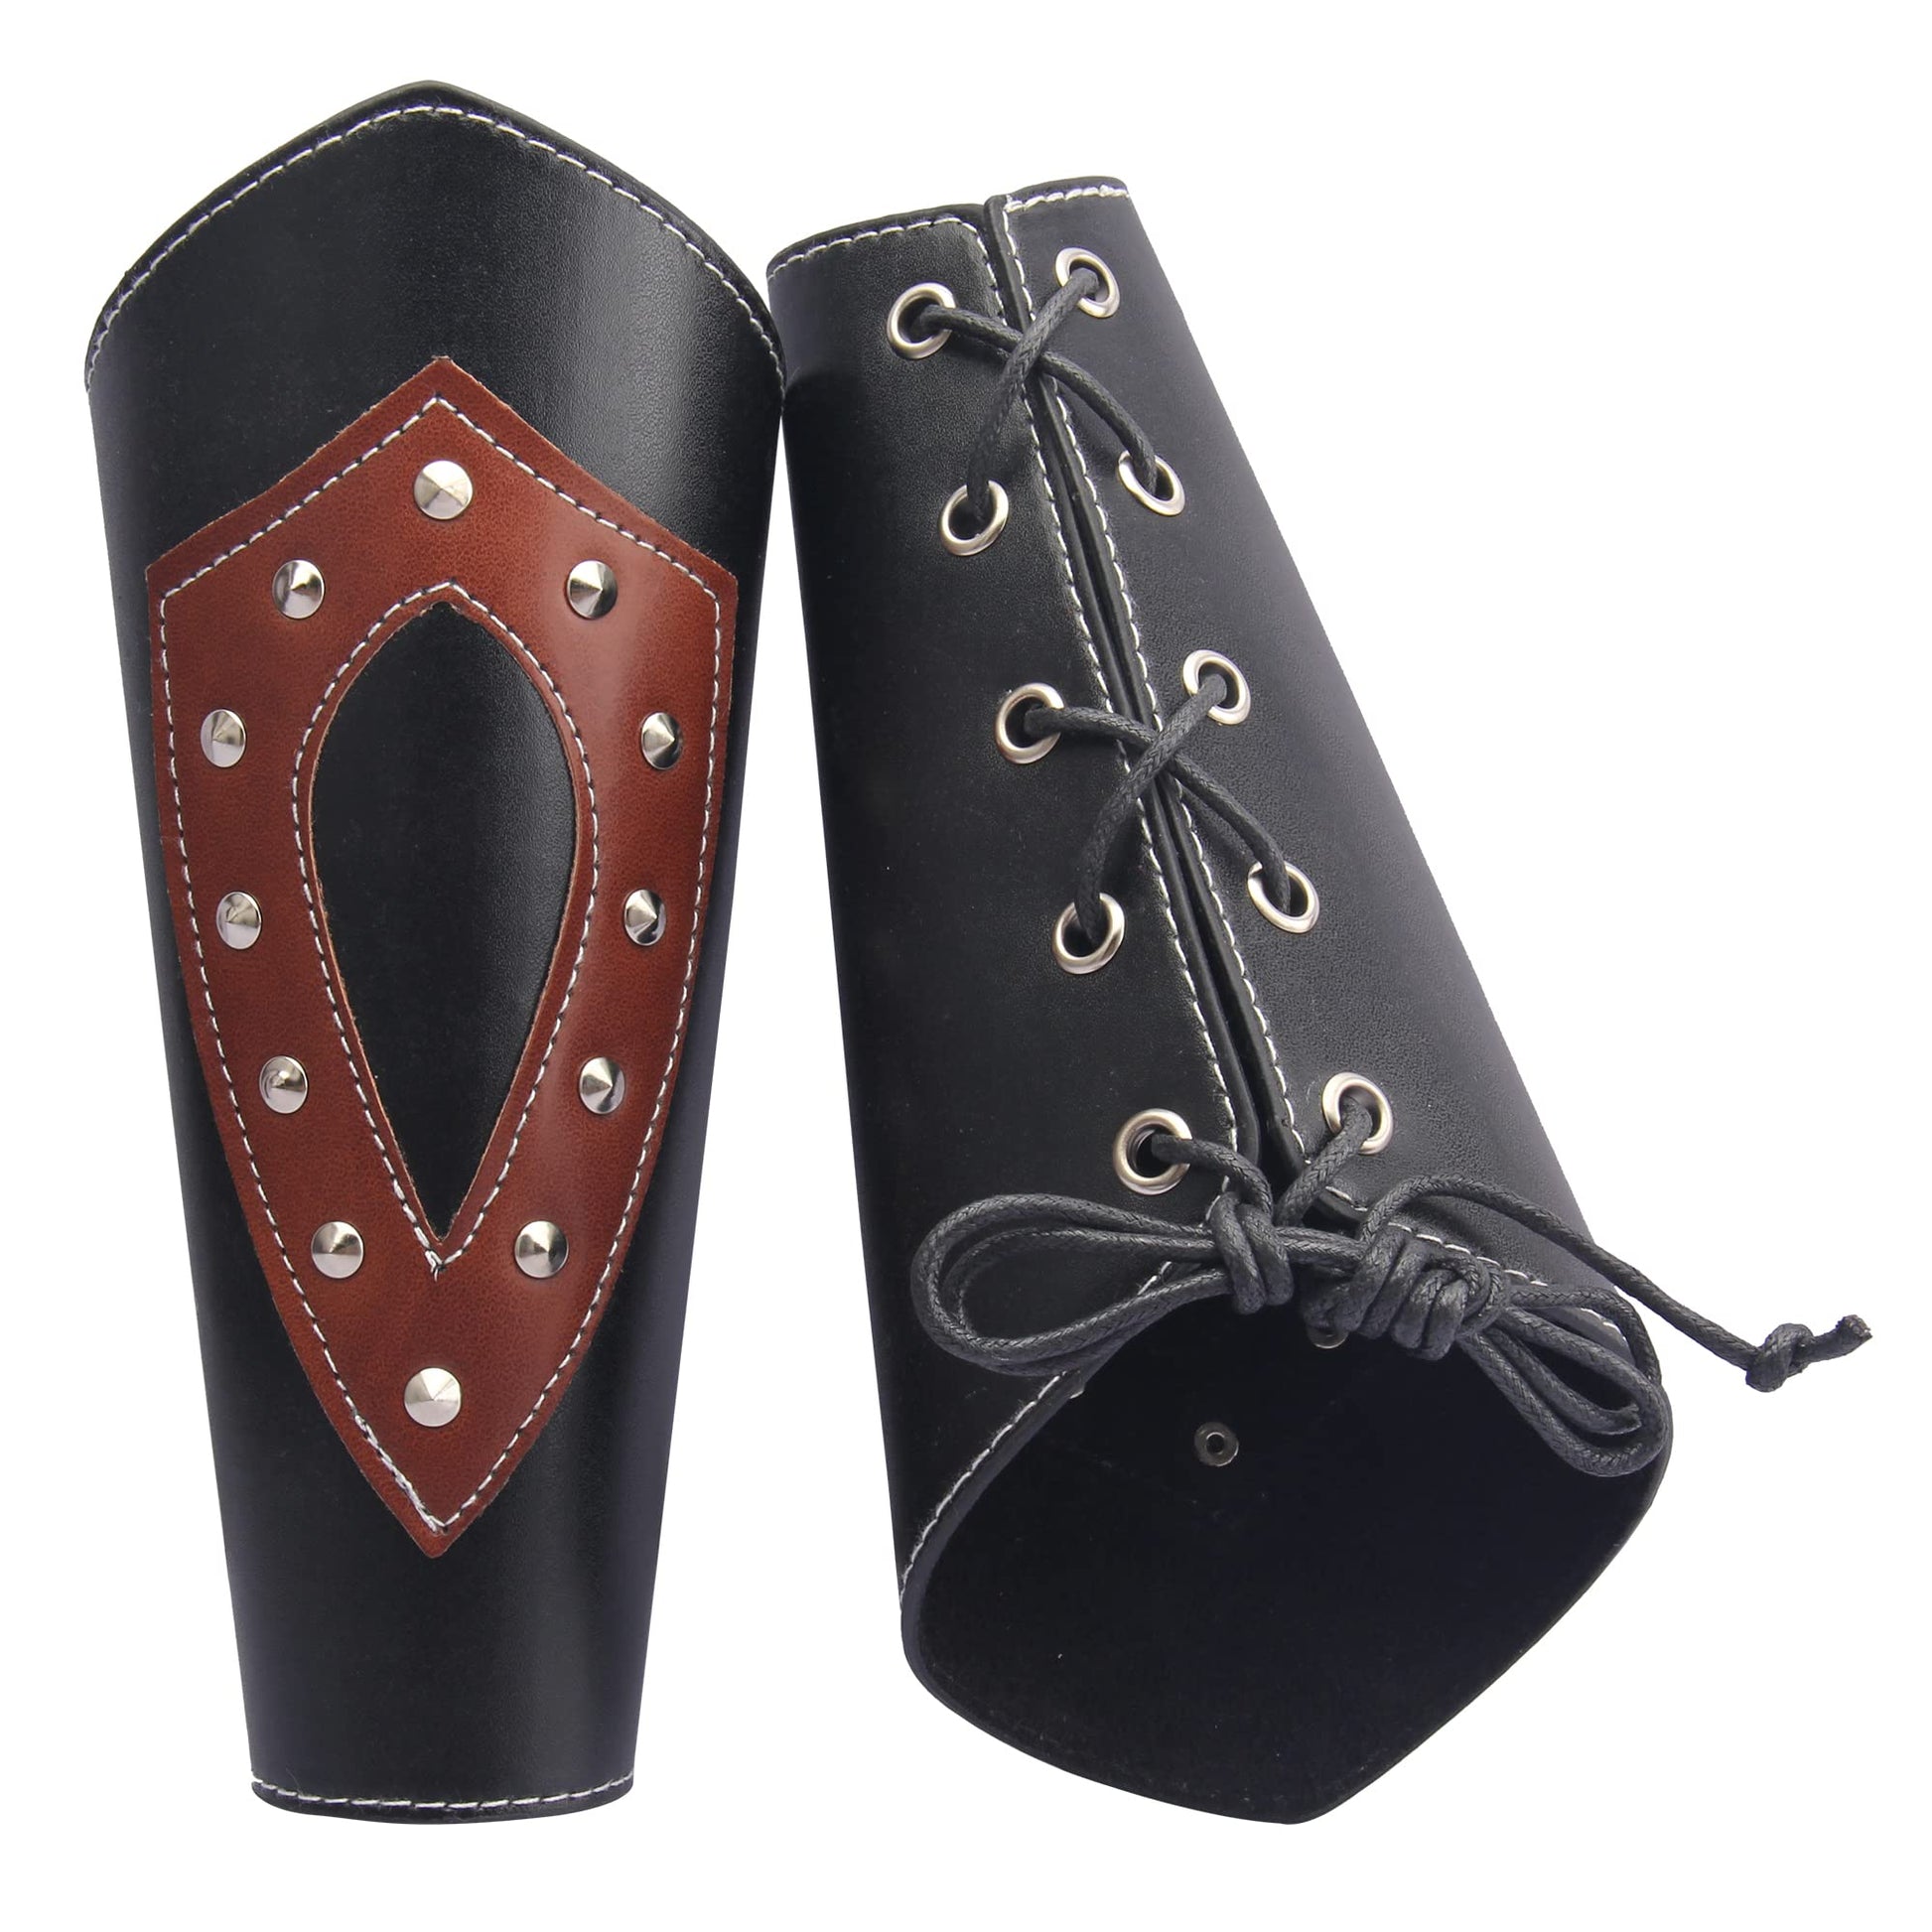  Leather Arm Guards Medieval Bracers Faux Leather